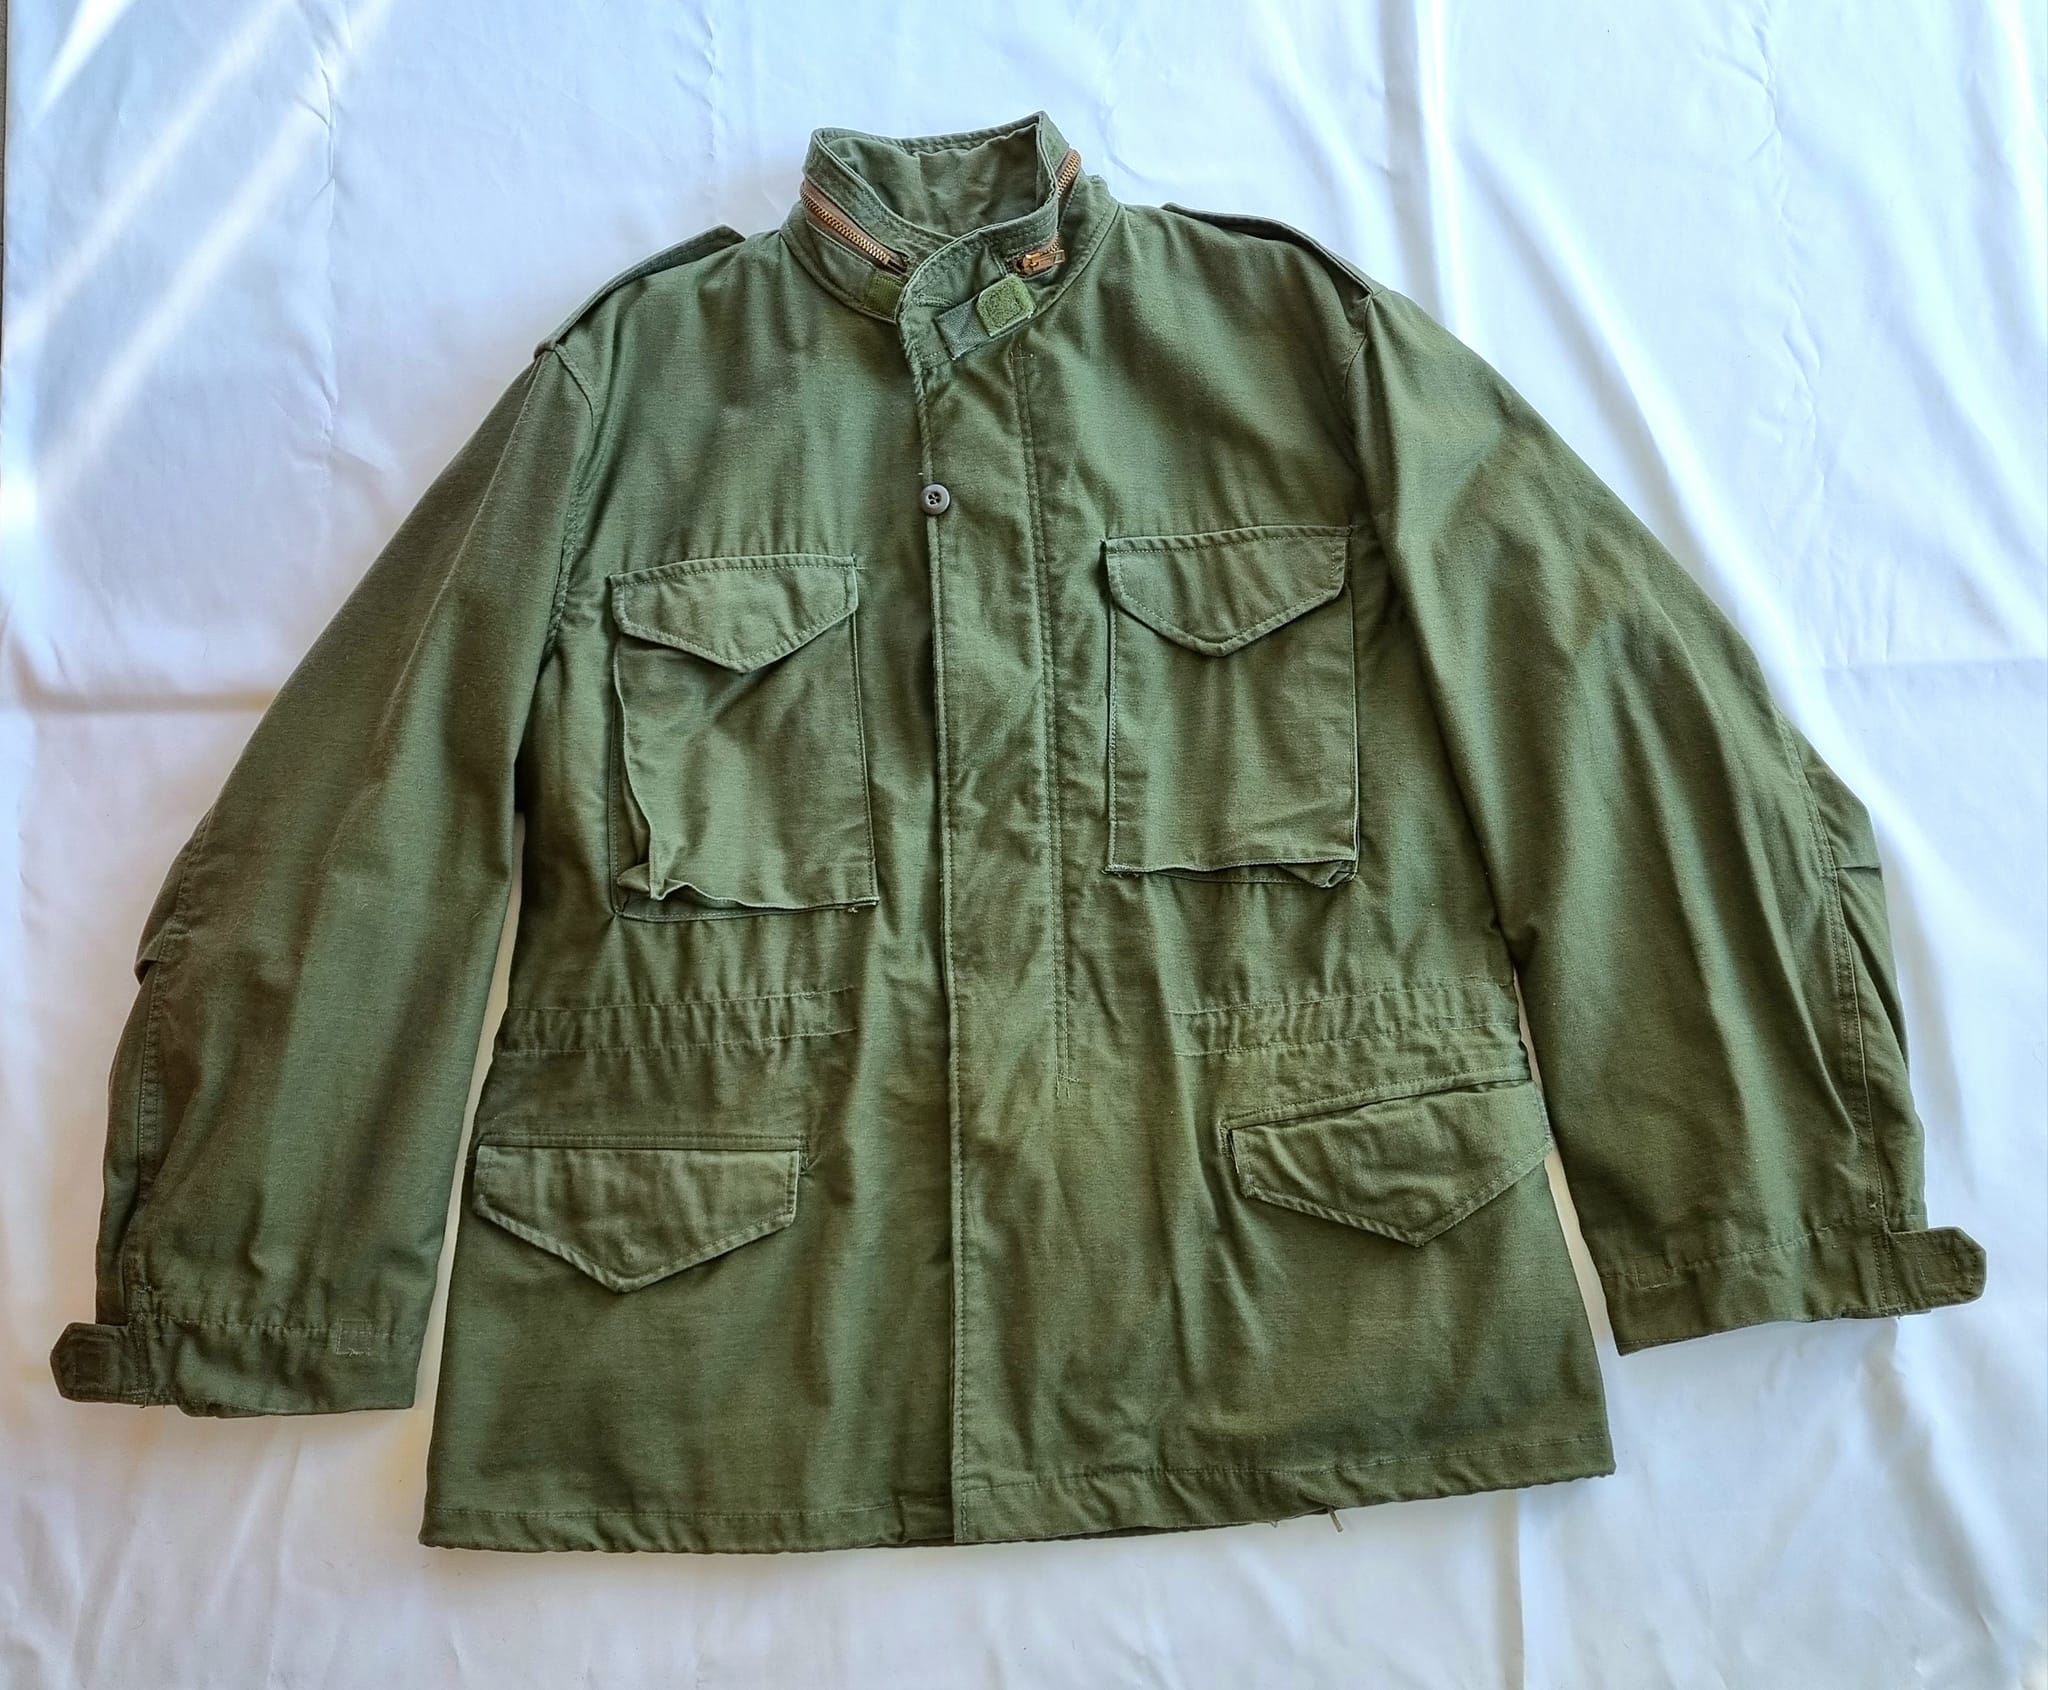 Giacca Militare Verde Field Jacket M65 Vintage '80 - PXPrato